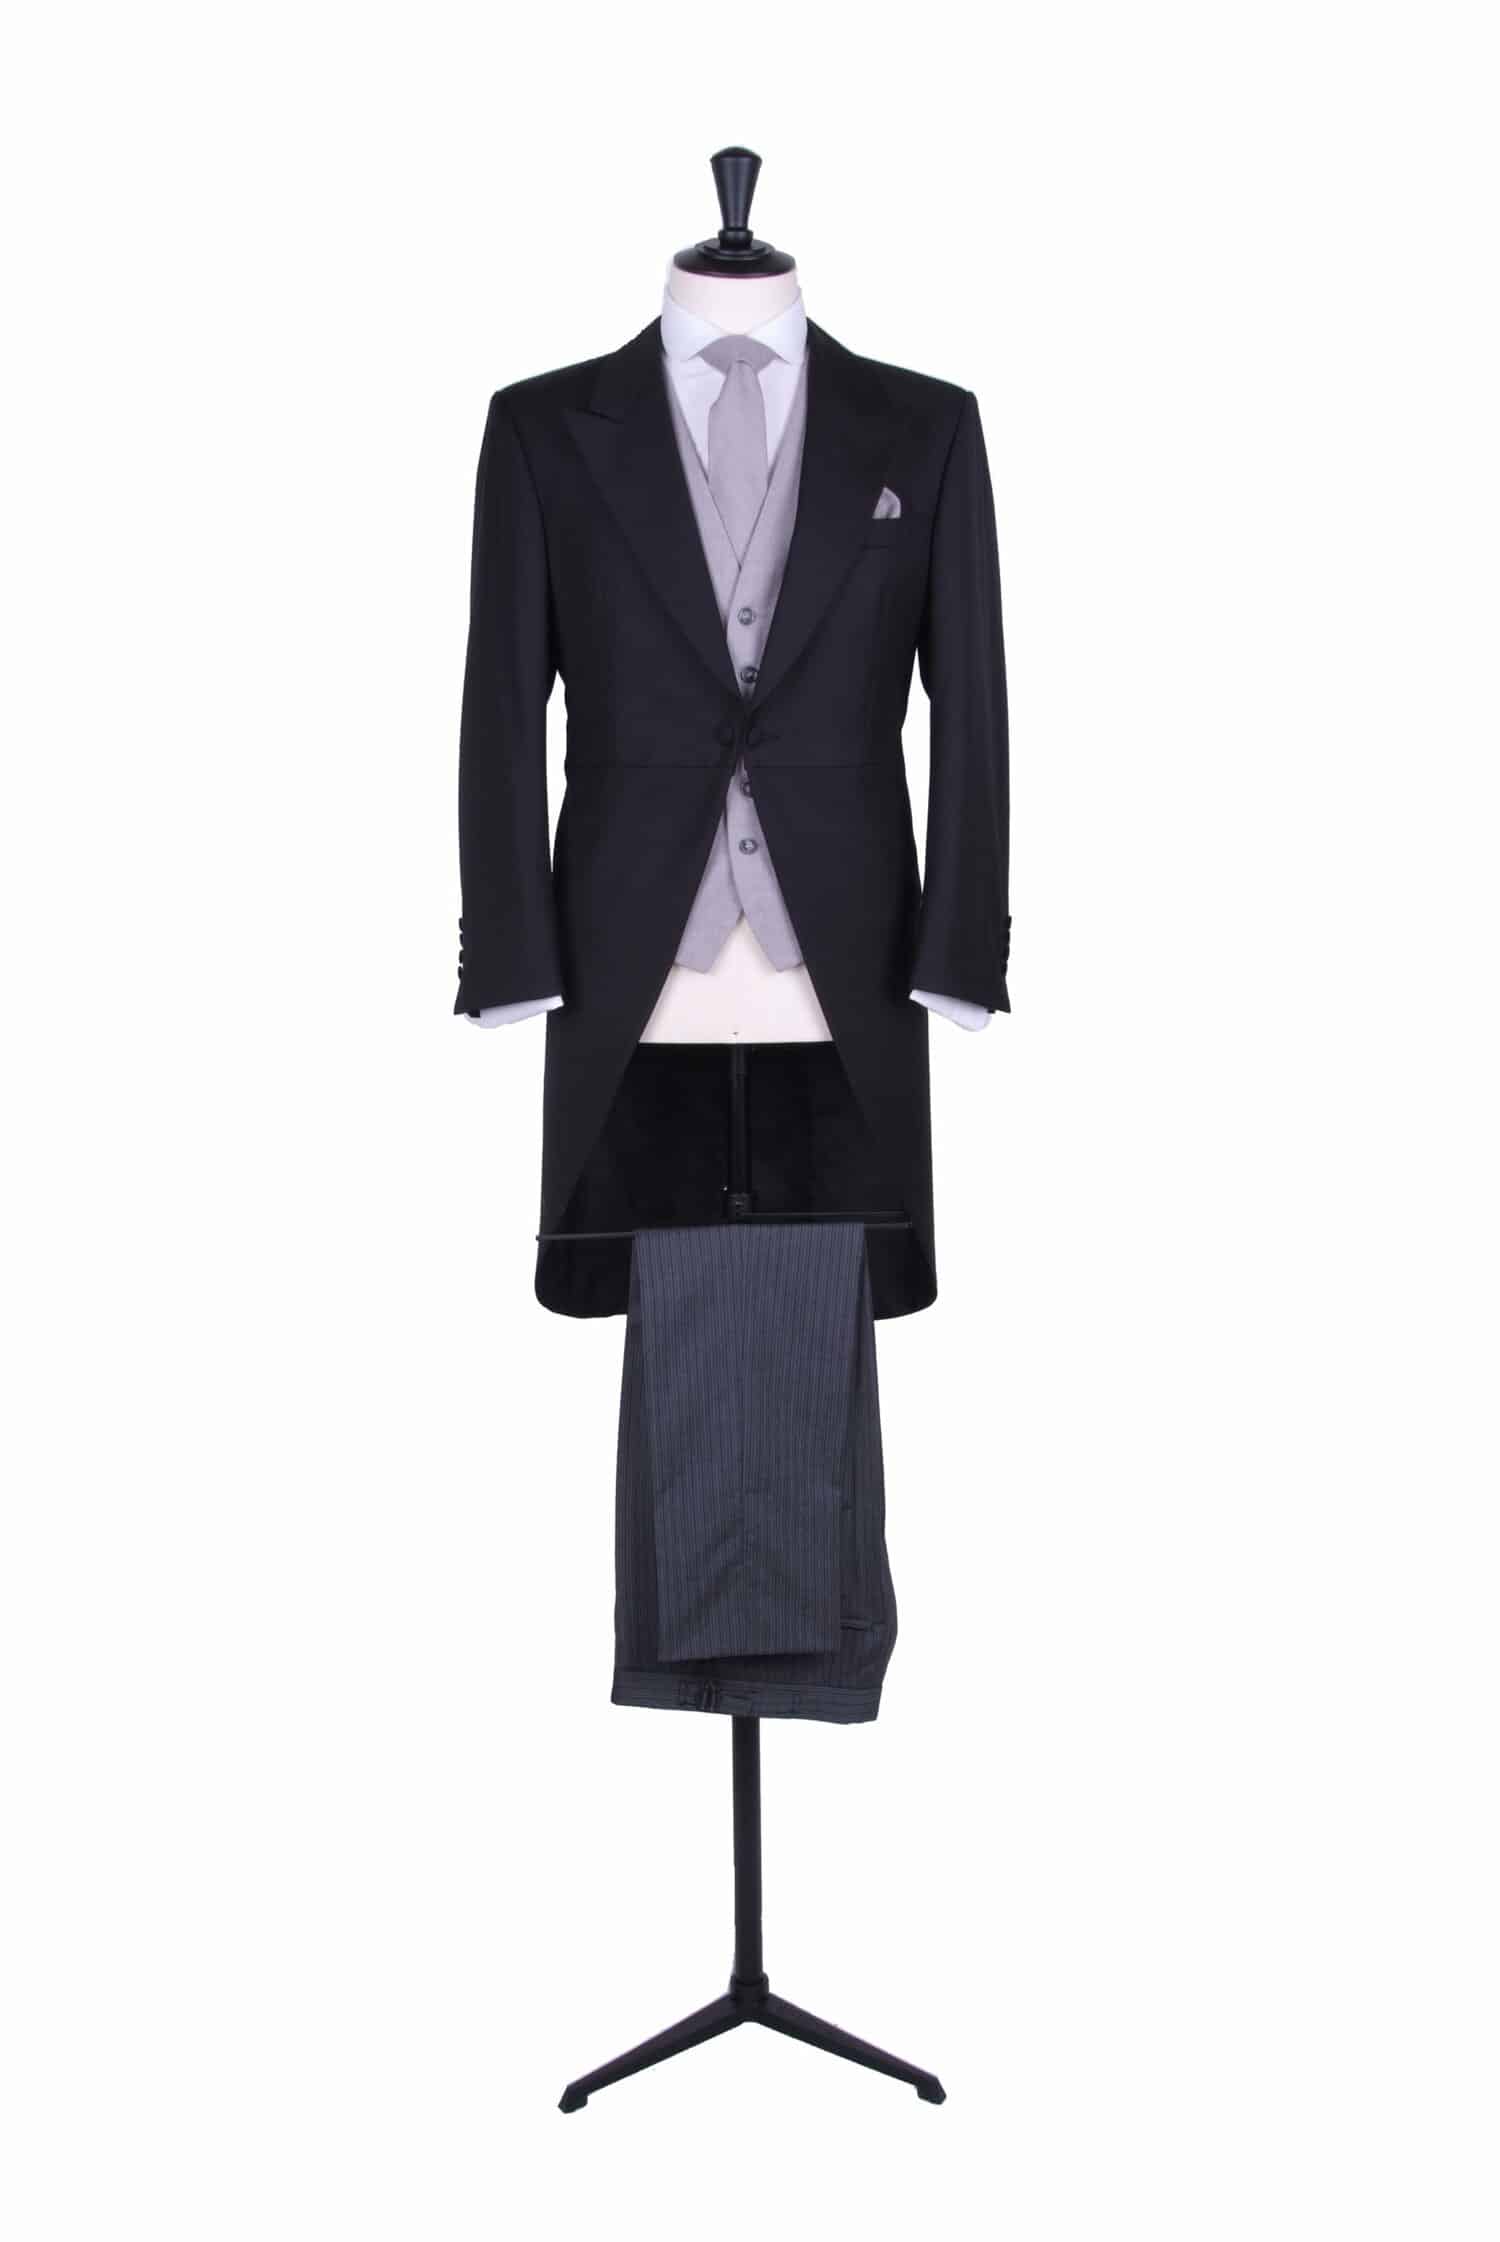 Royal Ascot suit hire. Black slim fit tailcoats to hire. navy slim fit tailcoats to hire. Grey slim fit morning suits to hire.